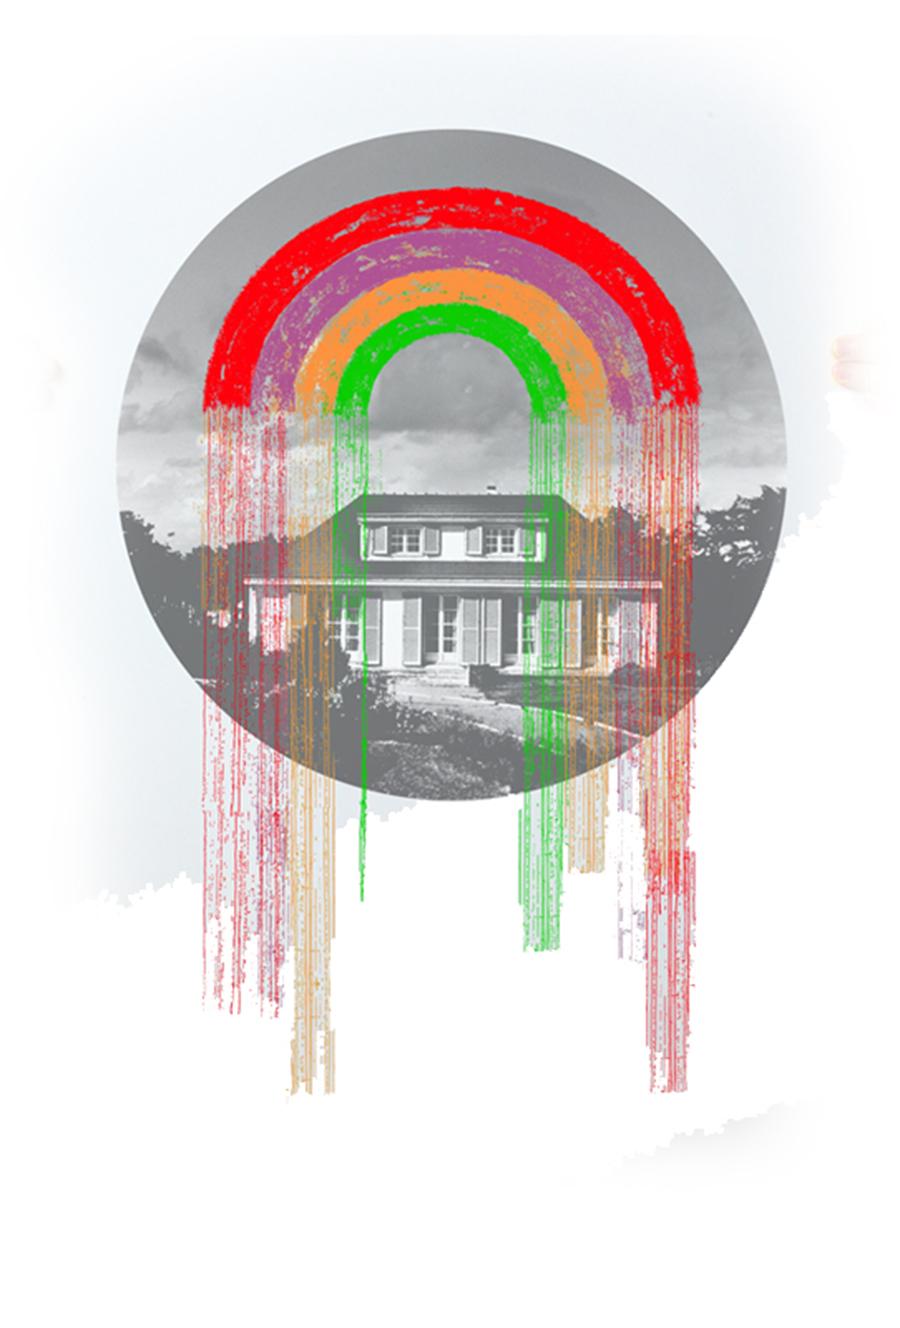 MORTGAGE - Print by Claudio Roncoli